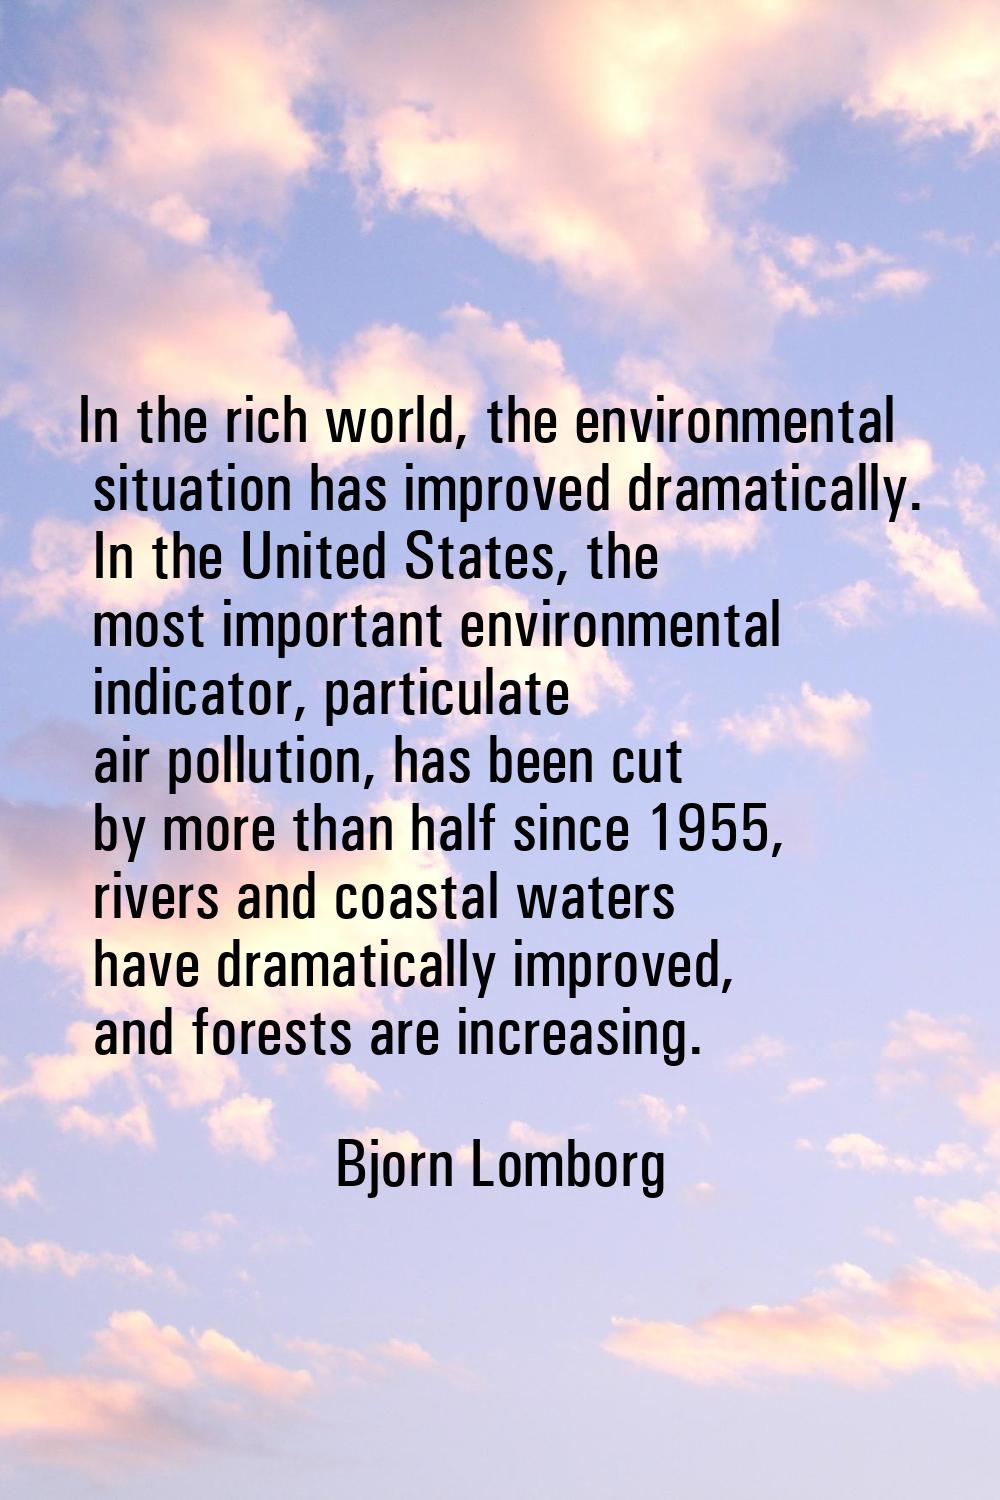 In the rich world, the environmental situation has improved dramatically. In the United States, the